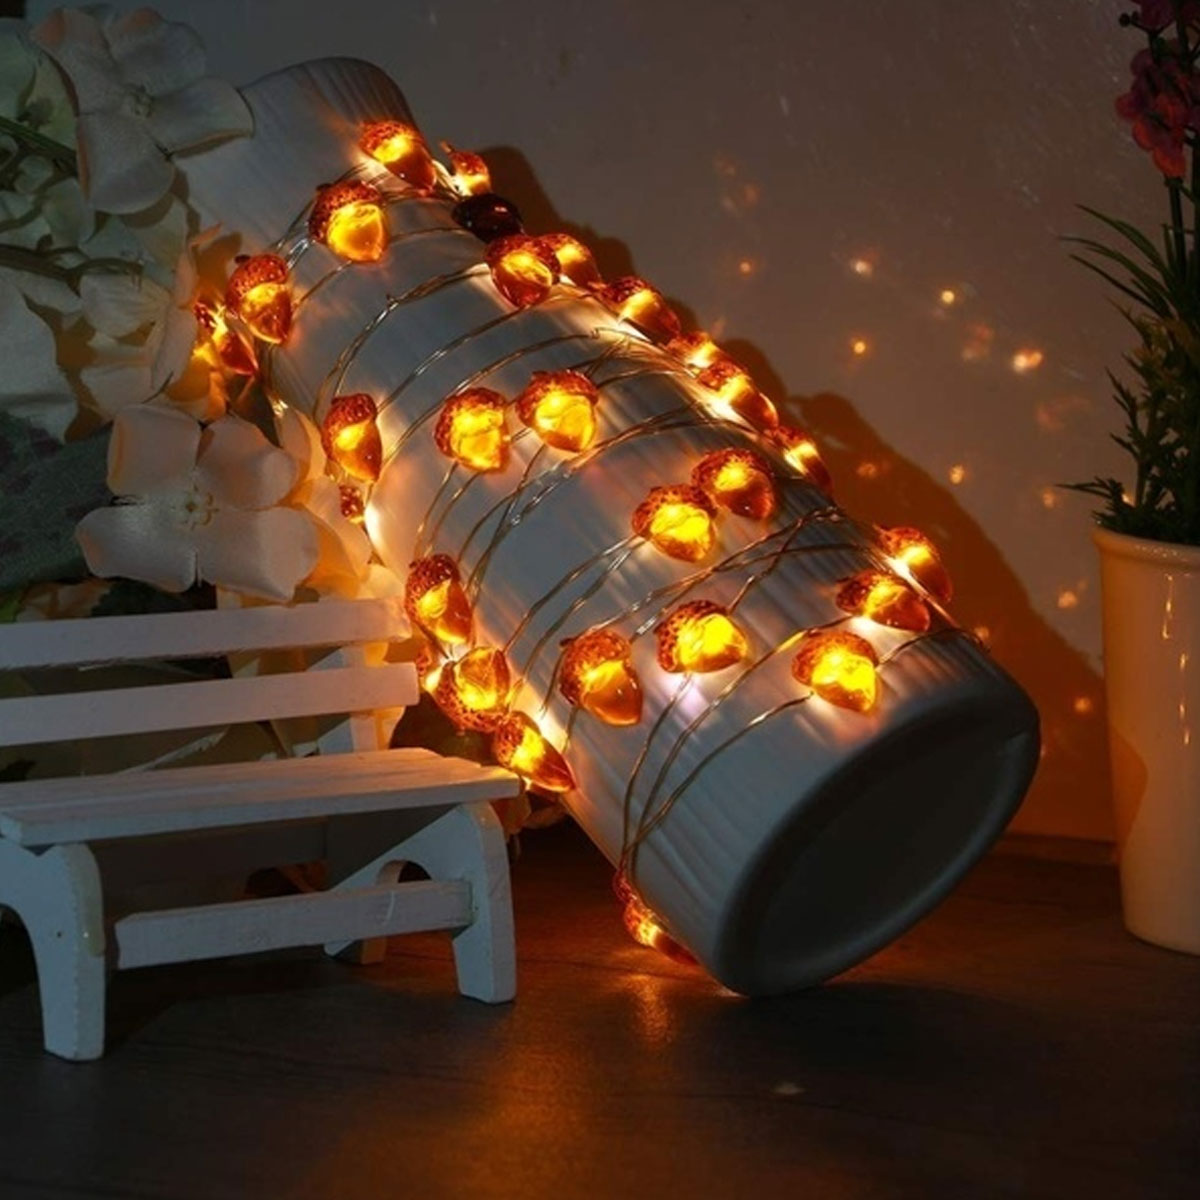 2M3M4M-LED-Acorn-String-Light-8-Modes-Waterproof-Christmas-Party-Decorative-Lamp-with-Remote-Control-1736088-7